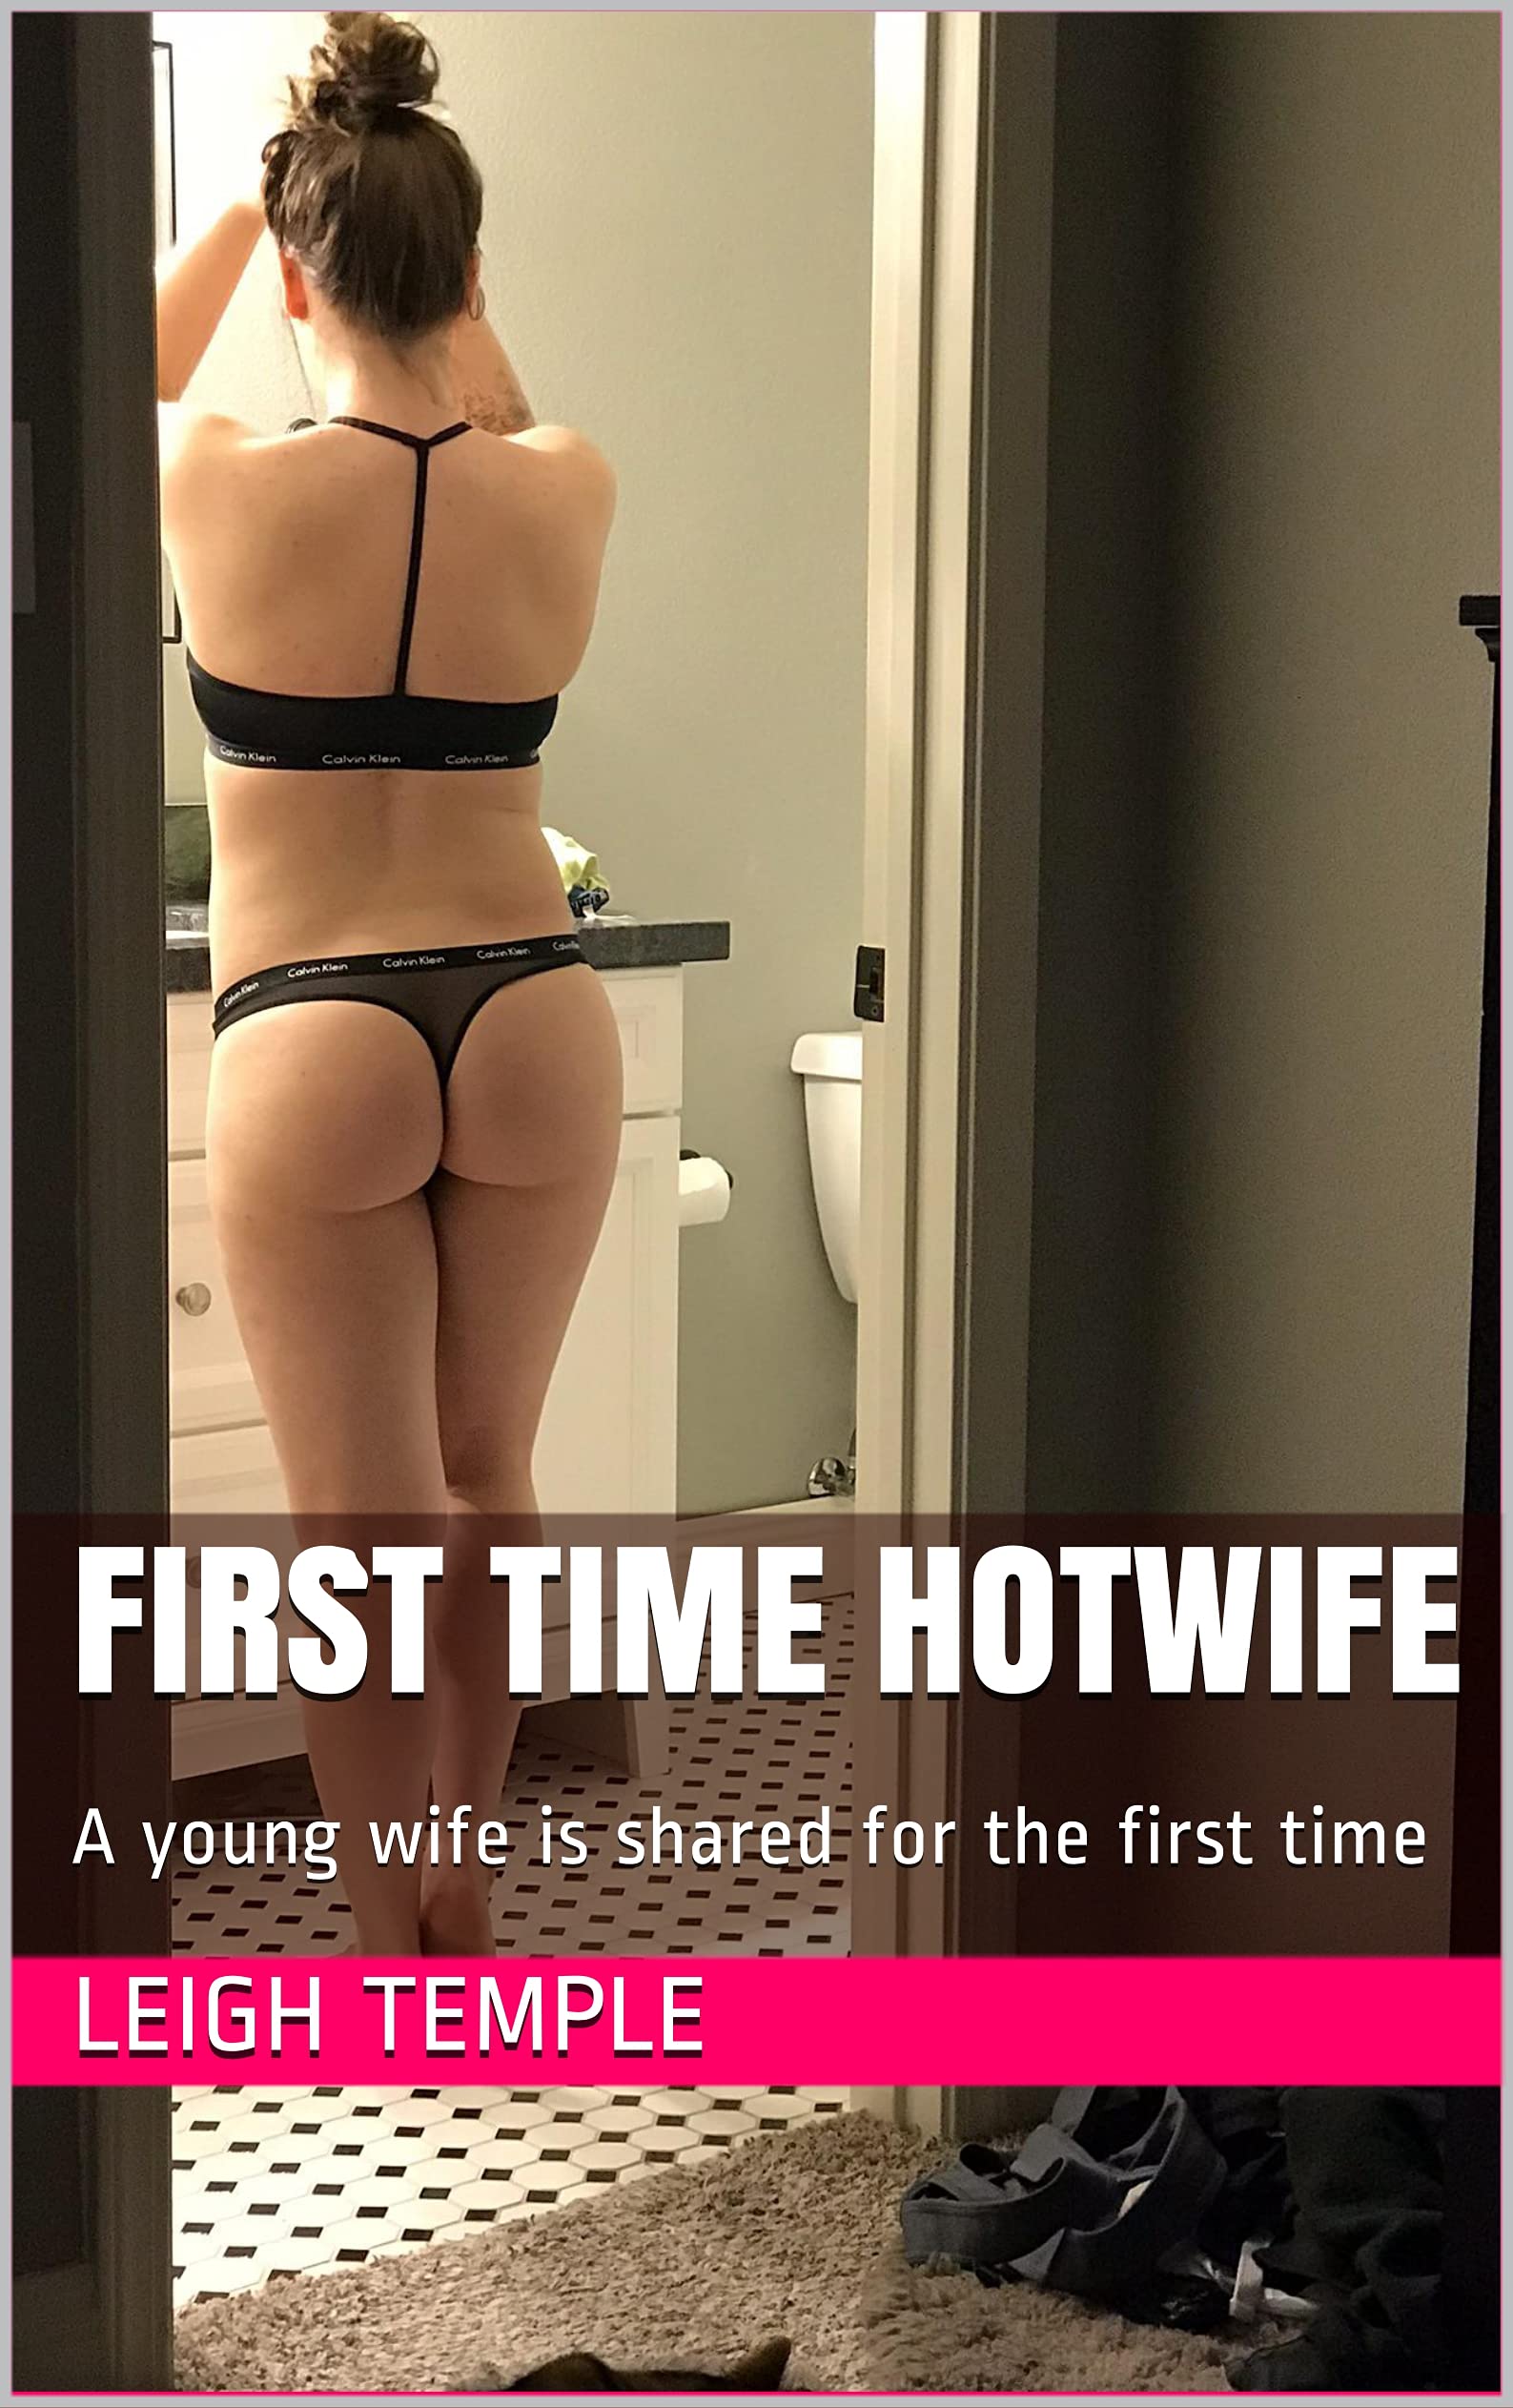 First Time Hotwife nudist photos